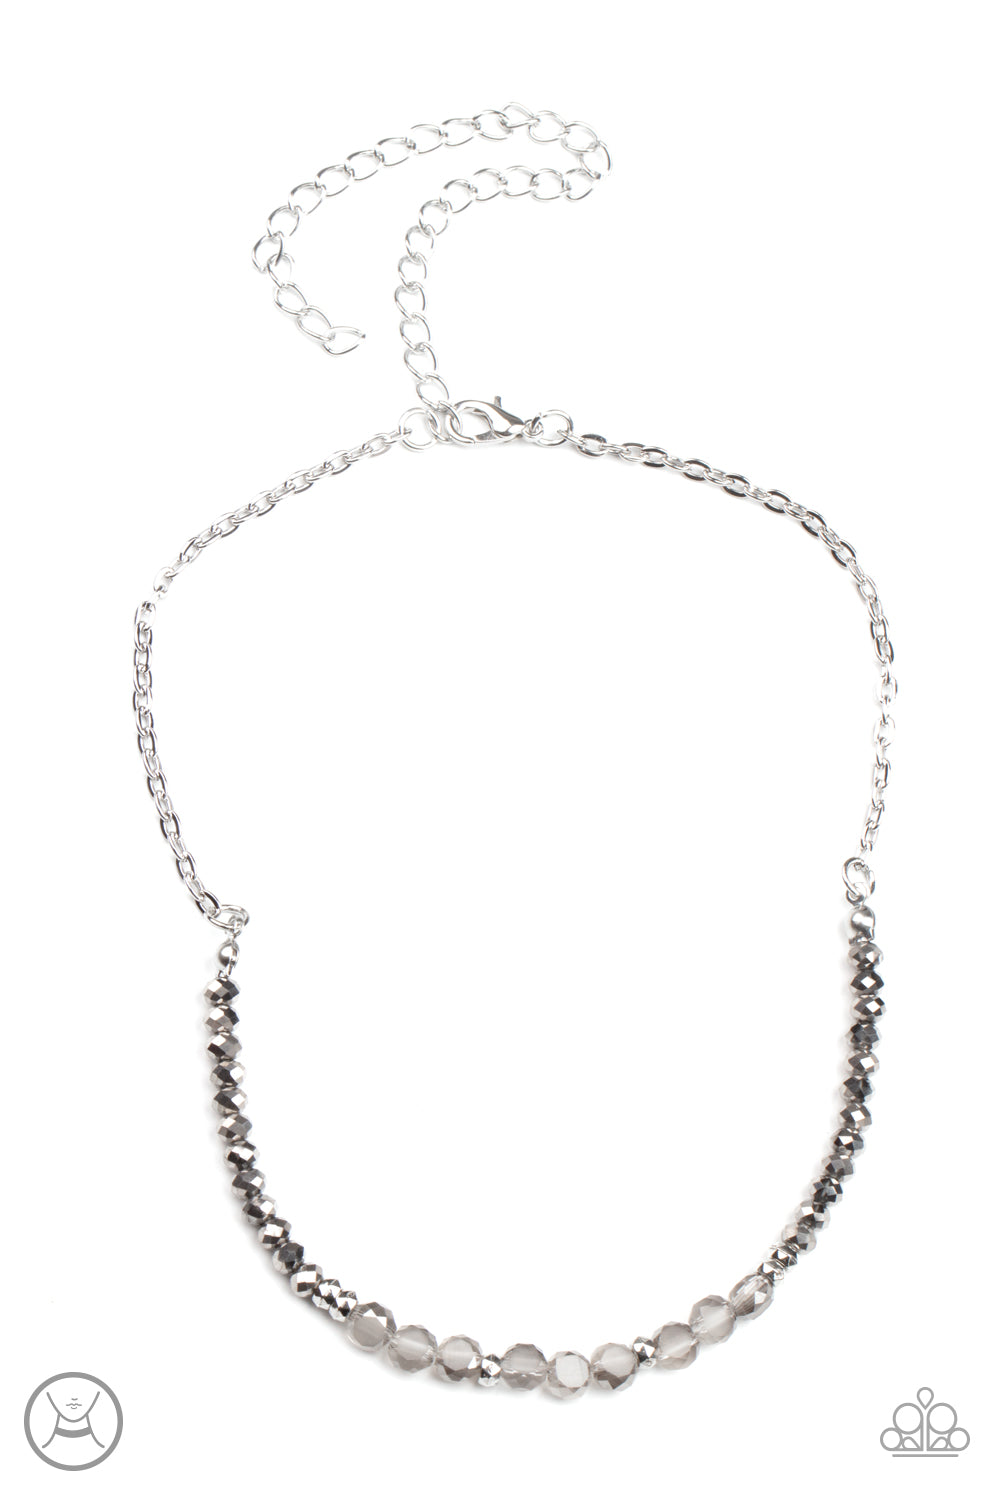 Space Odyssey Silver Choker Necklace - Paparazzi Accessories  A dainty collection of mismatched silver beads, hematite rhinestones, and smoky crystal-like accents are threaded along an invisible wire around the neck for a stellar look. Features an adjustable clasp closure.  All Paparazzi Accessories are lead free and nickel free!  Sold as one individual choker necklace. Includes one pair of matching earrings.